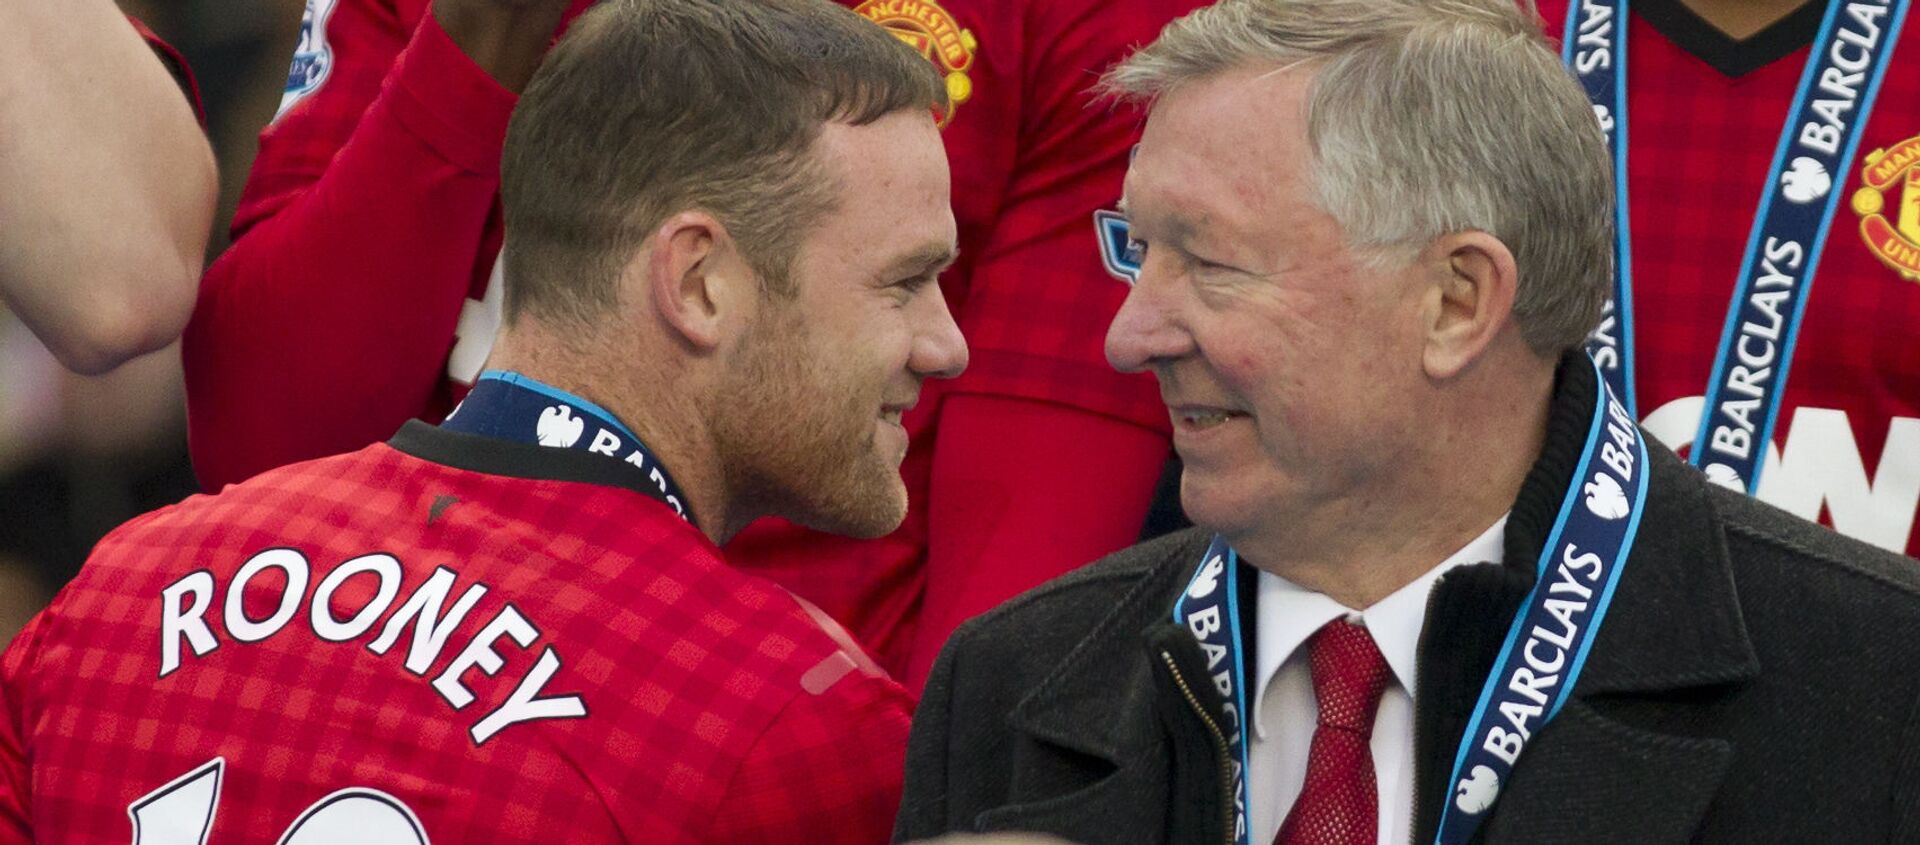 Manchester United's manager Sir Alex Ferguson, right, speaks to striker Wayne Rooney after his last home game in charge of the club, their English Premier League soccer match against Swansea, at Old Trafford Stadium, Manchester, England, Sunday May 12, 2013 - Sputnik International, 1920, 01.04.2021